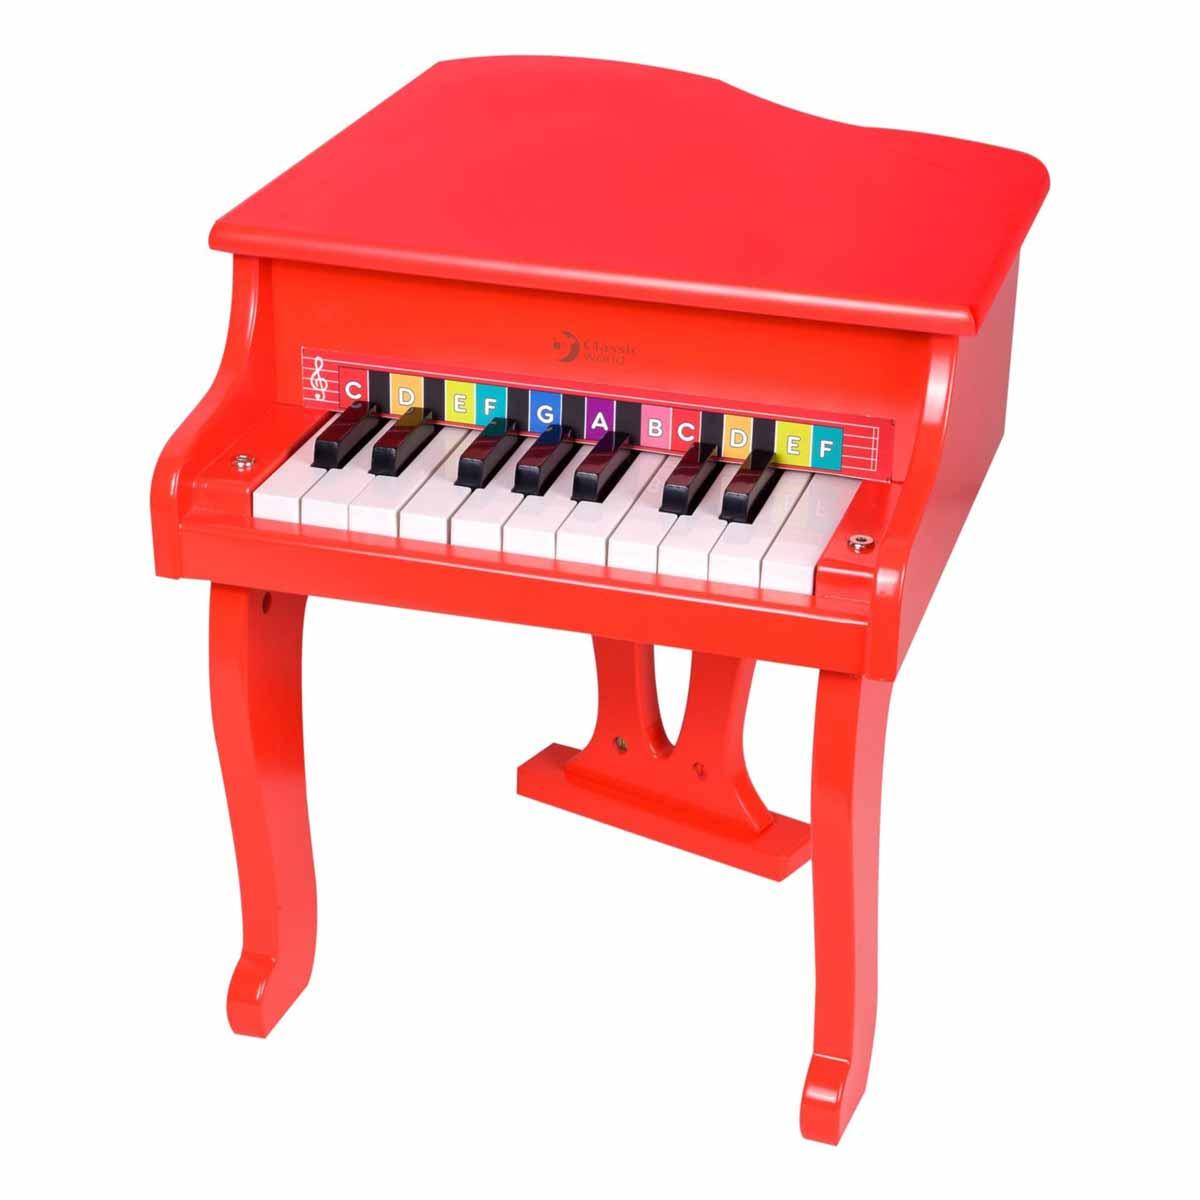 Children's Wooden Royal - Red - MoonyBoon